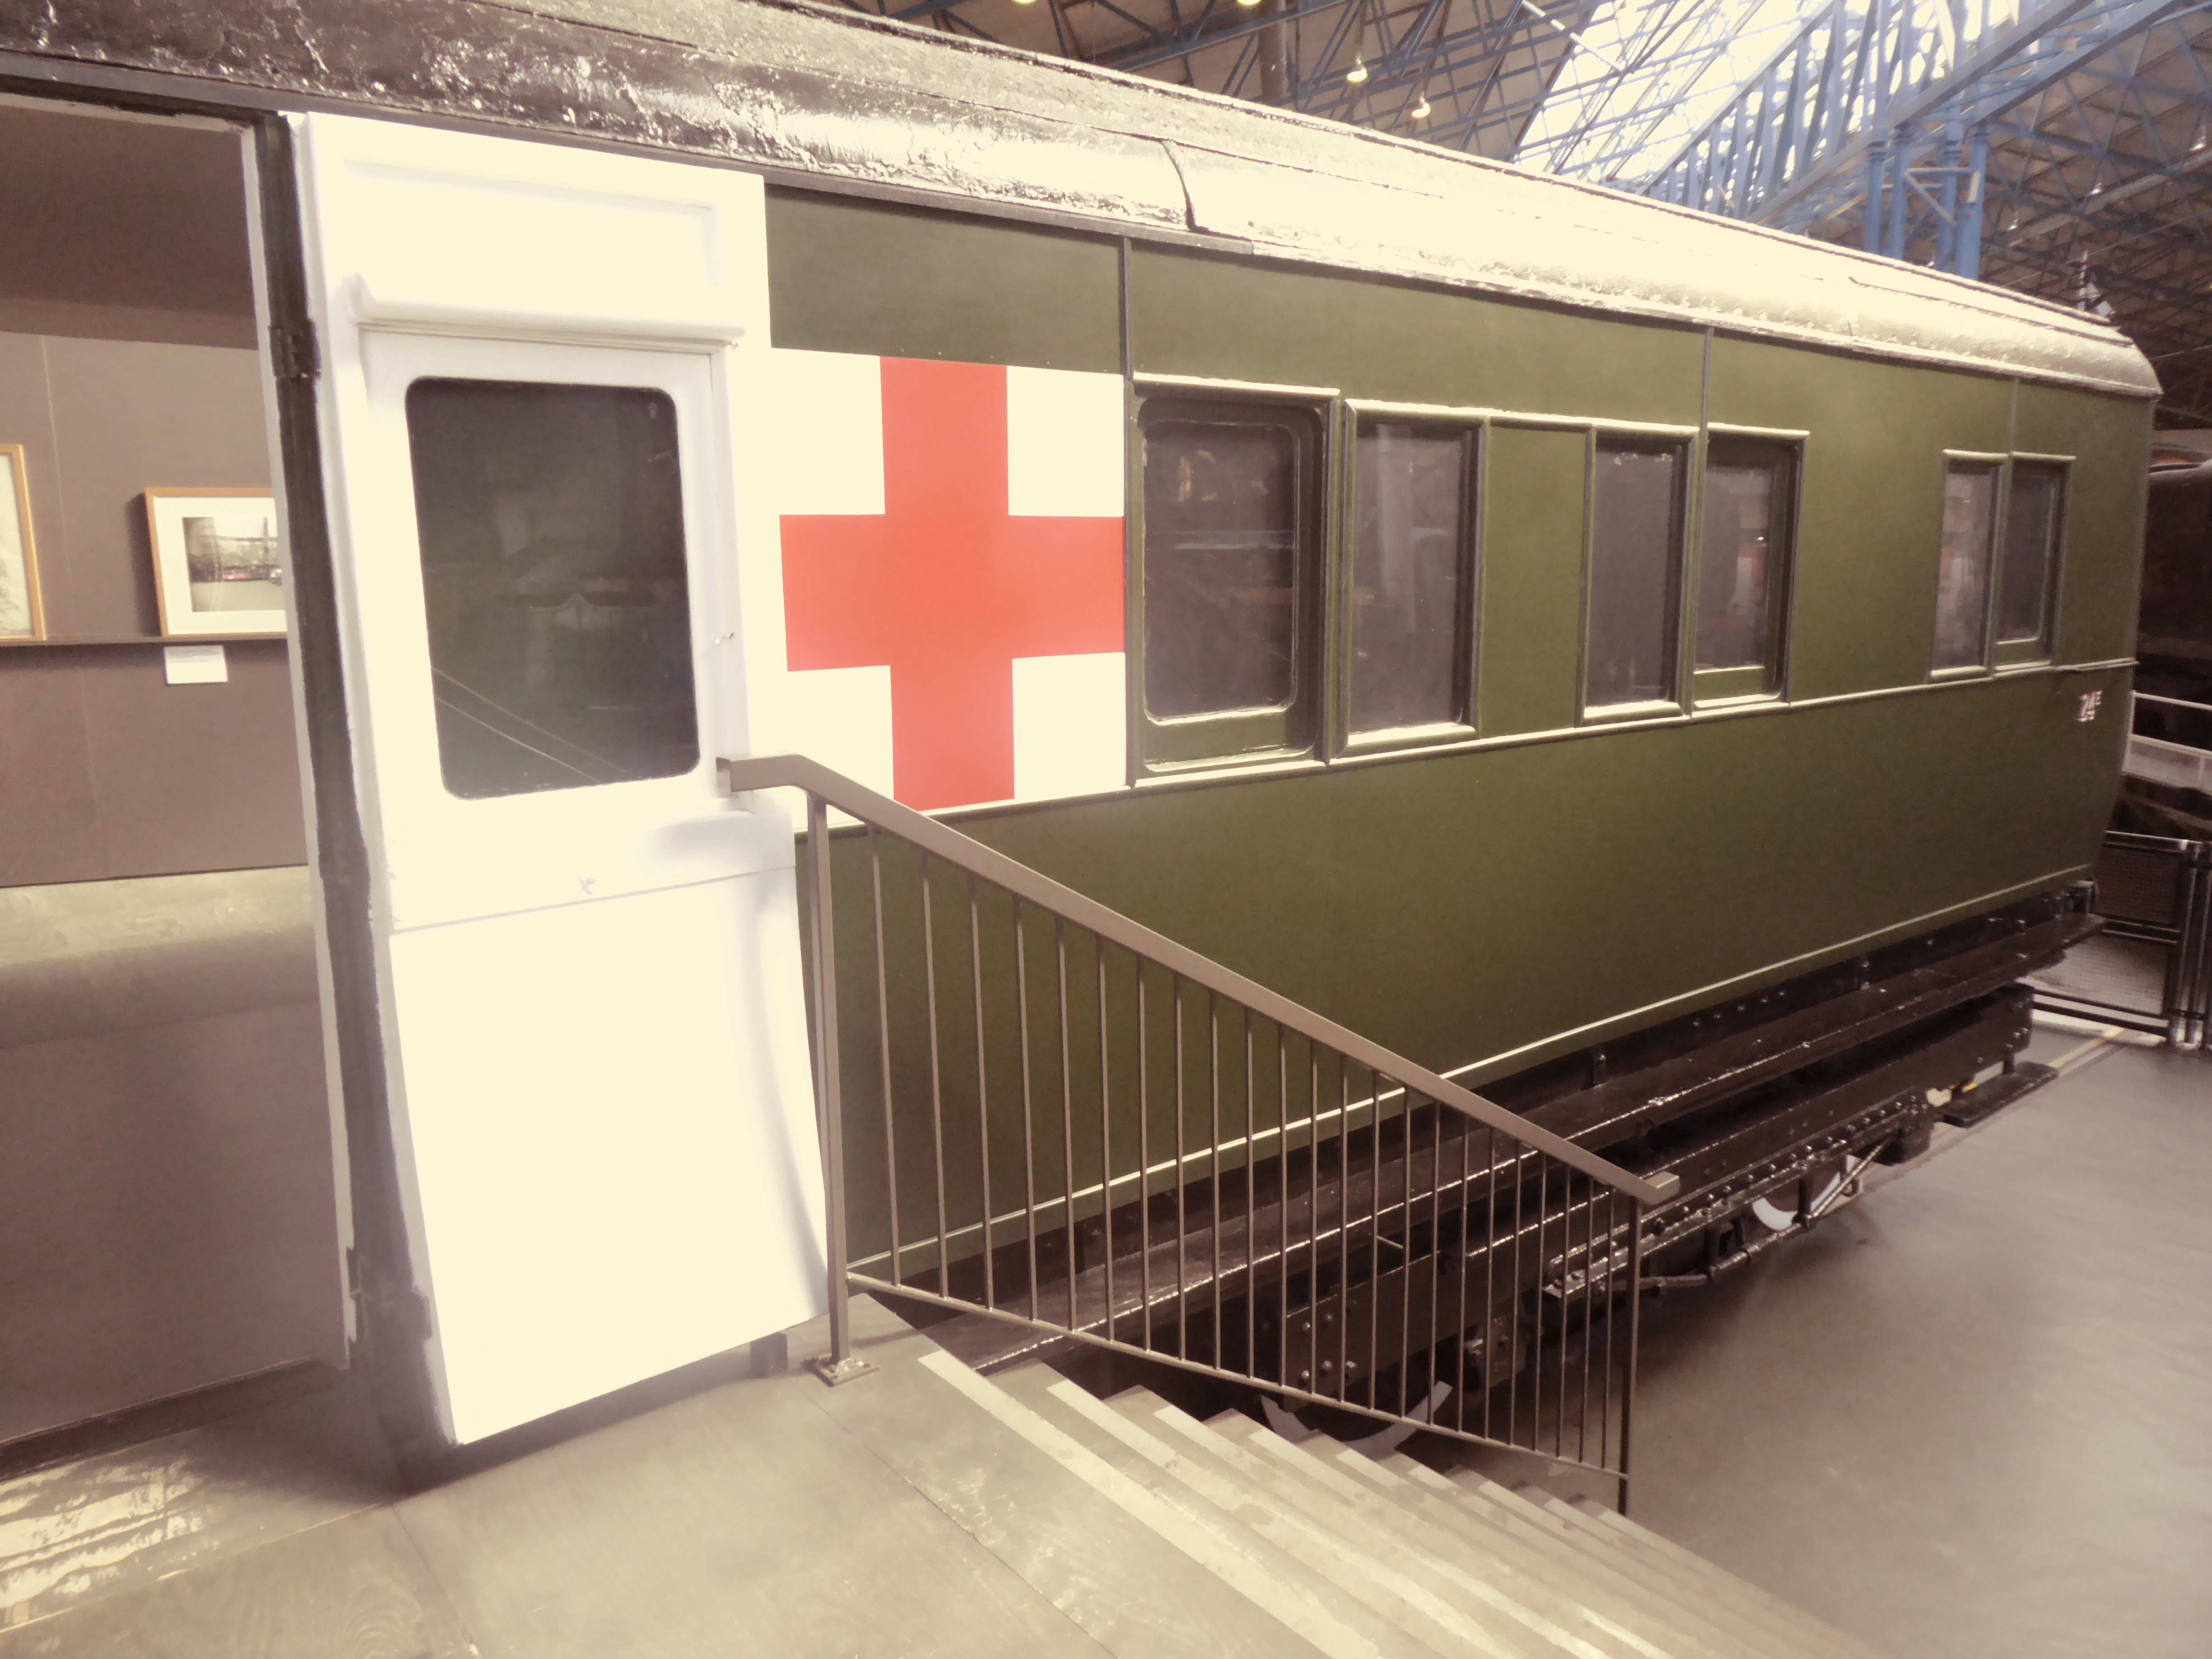 National Railway Museum medical carriage